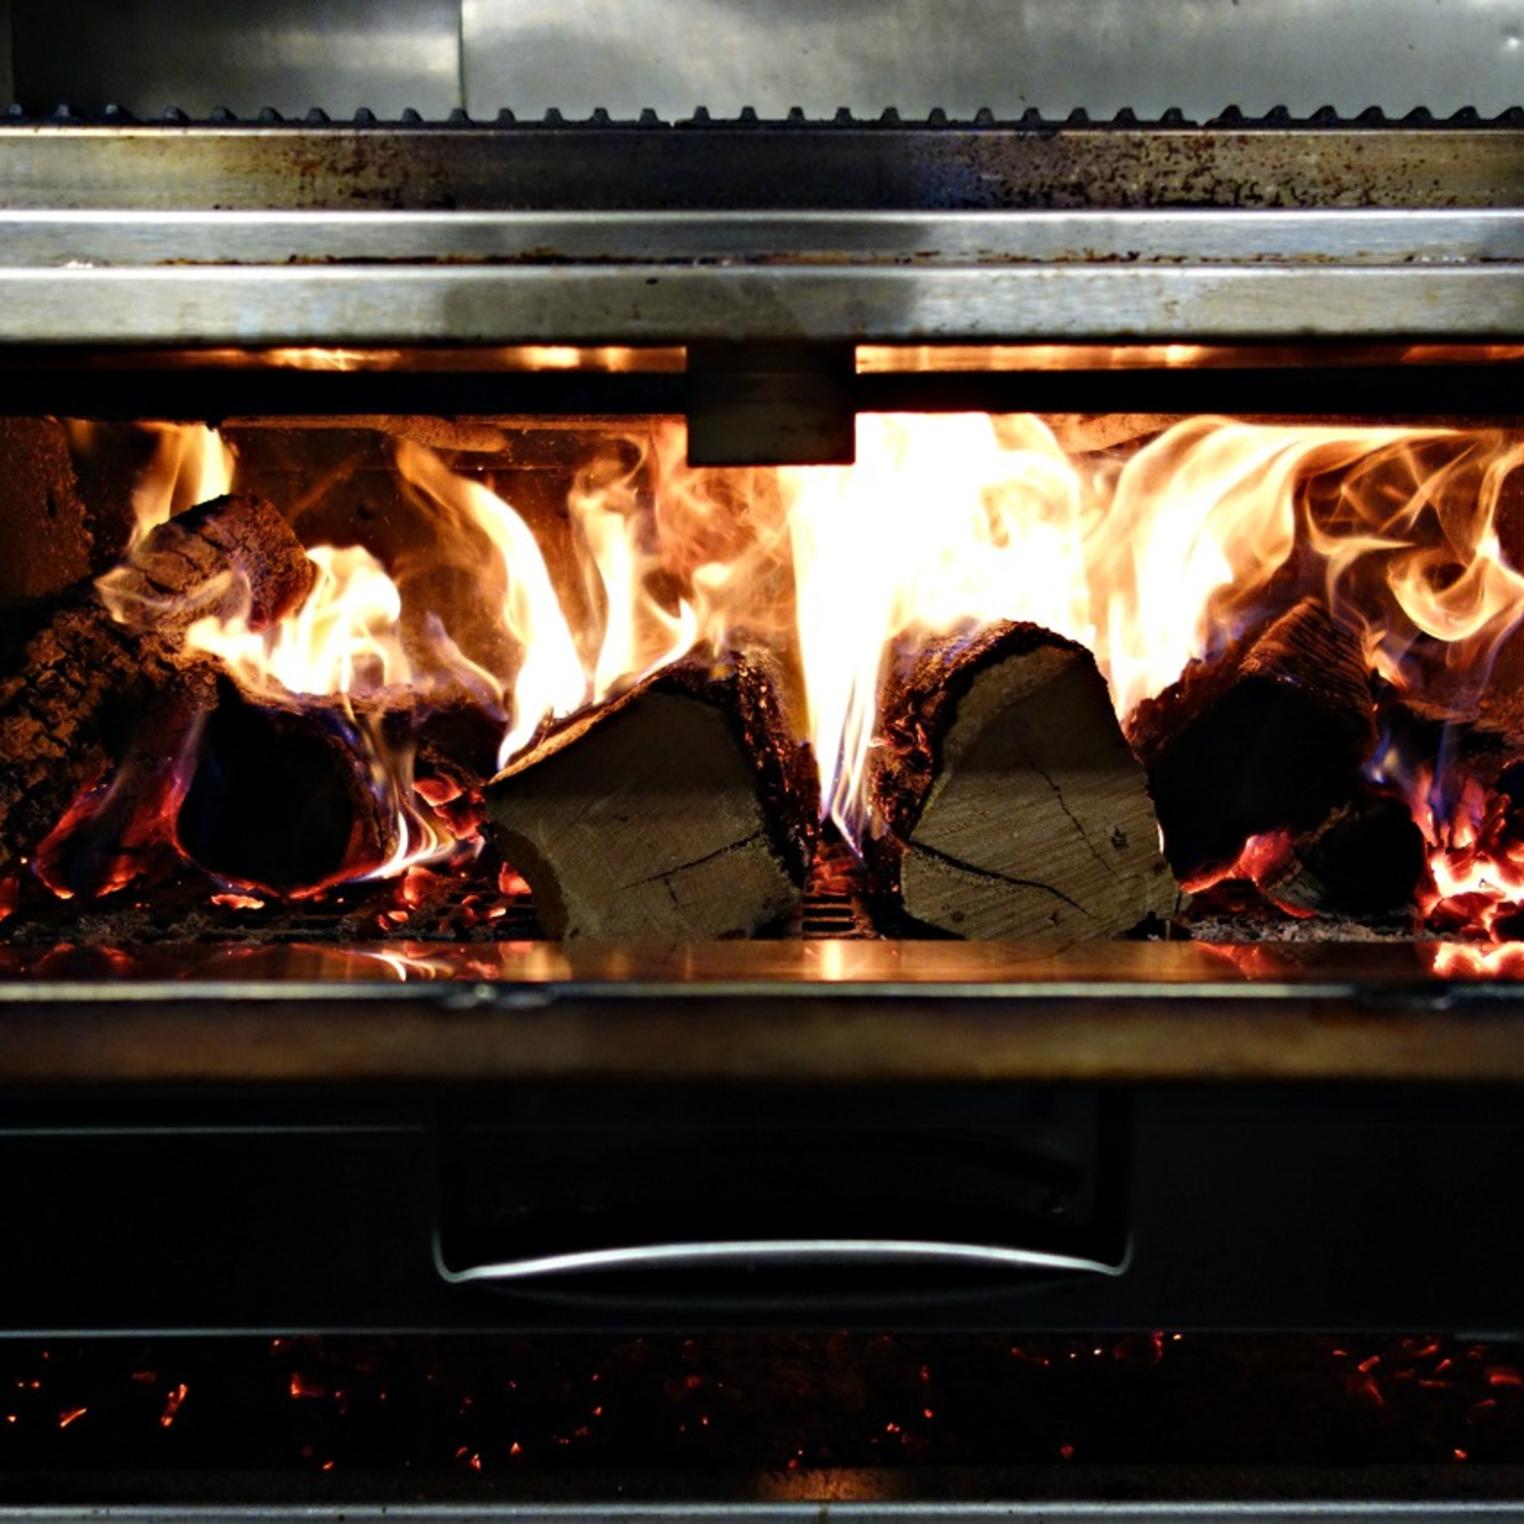 All steaks are cooked on a wood-fired grill.